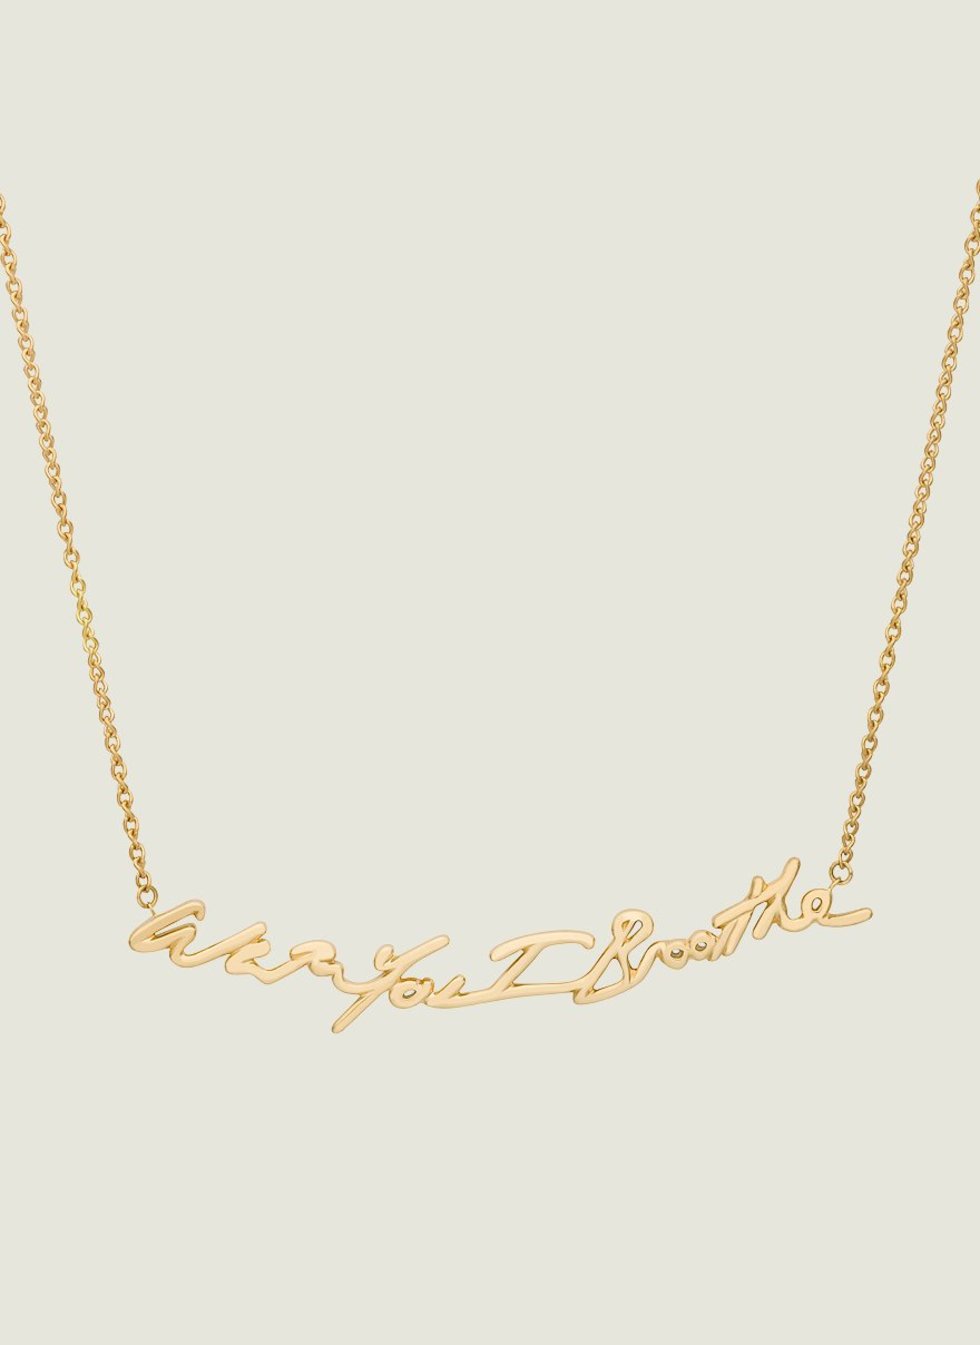 3-with-you-i-breathe-necklace-2-100